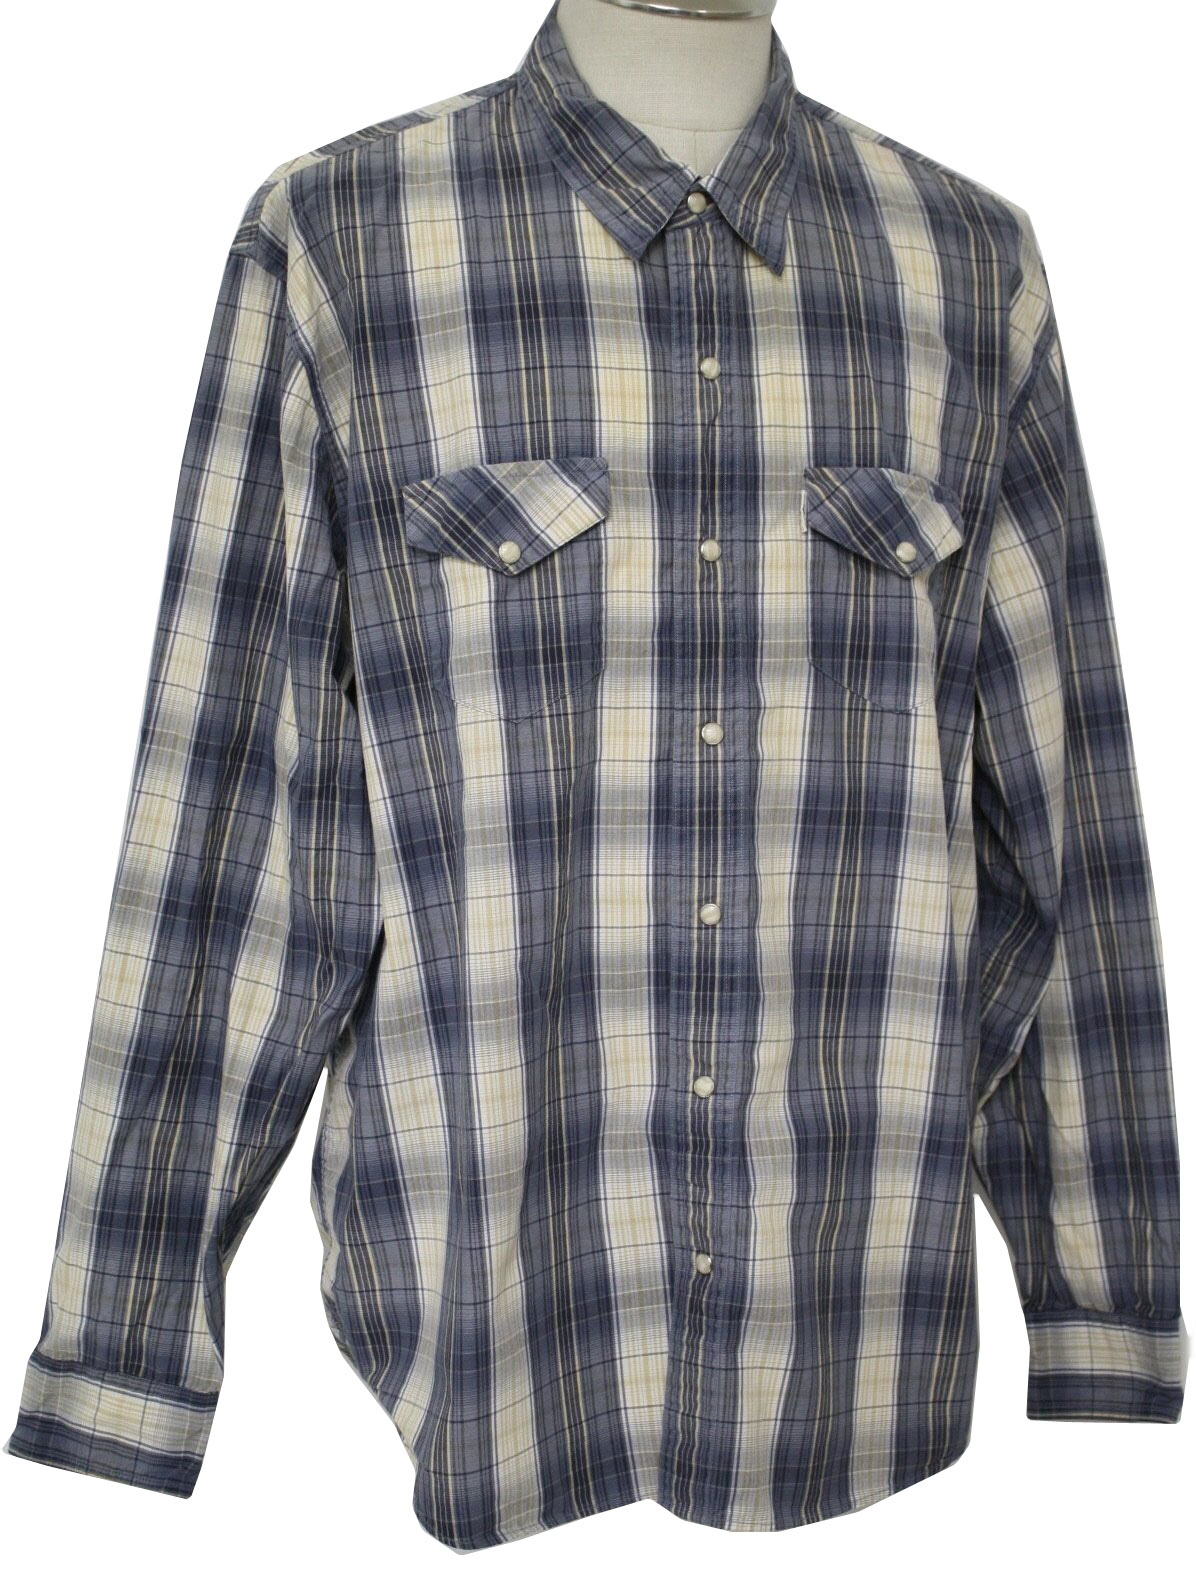 Western Shirt: 90s -BKE 67- Mens blue, white, tan and grey cotton blend ...